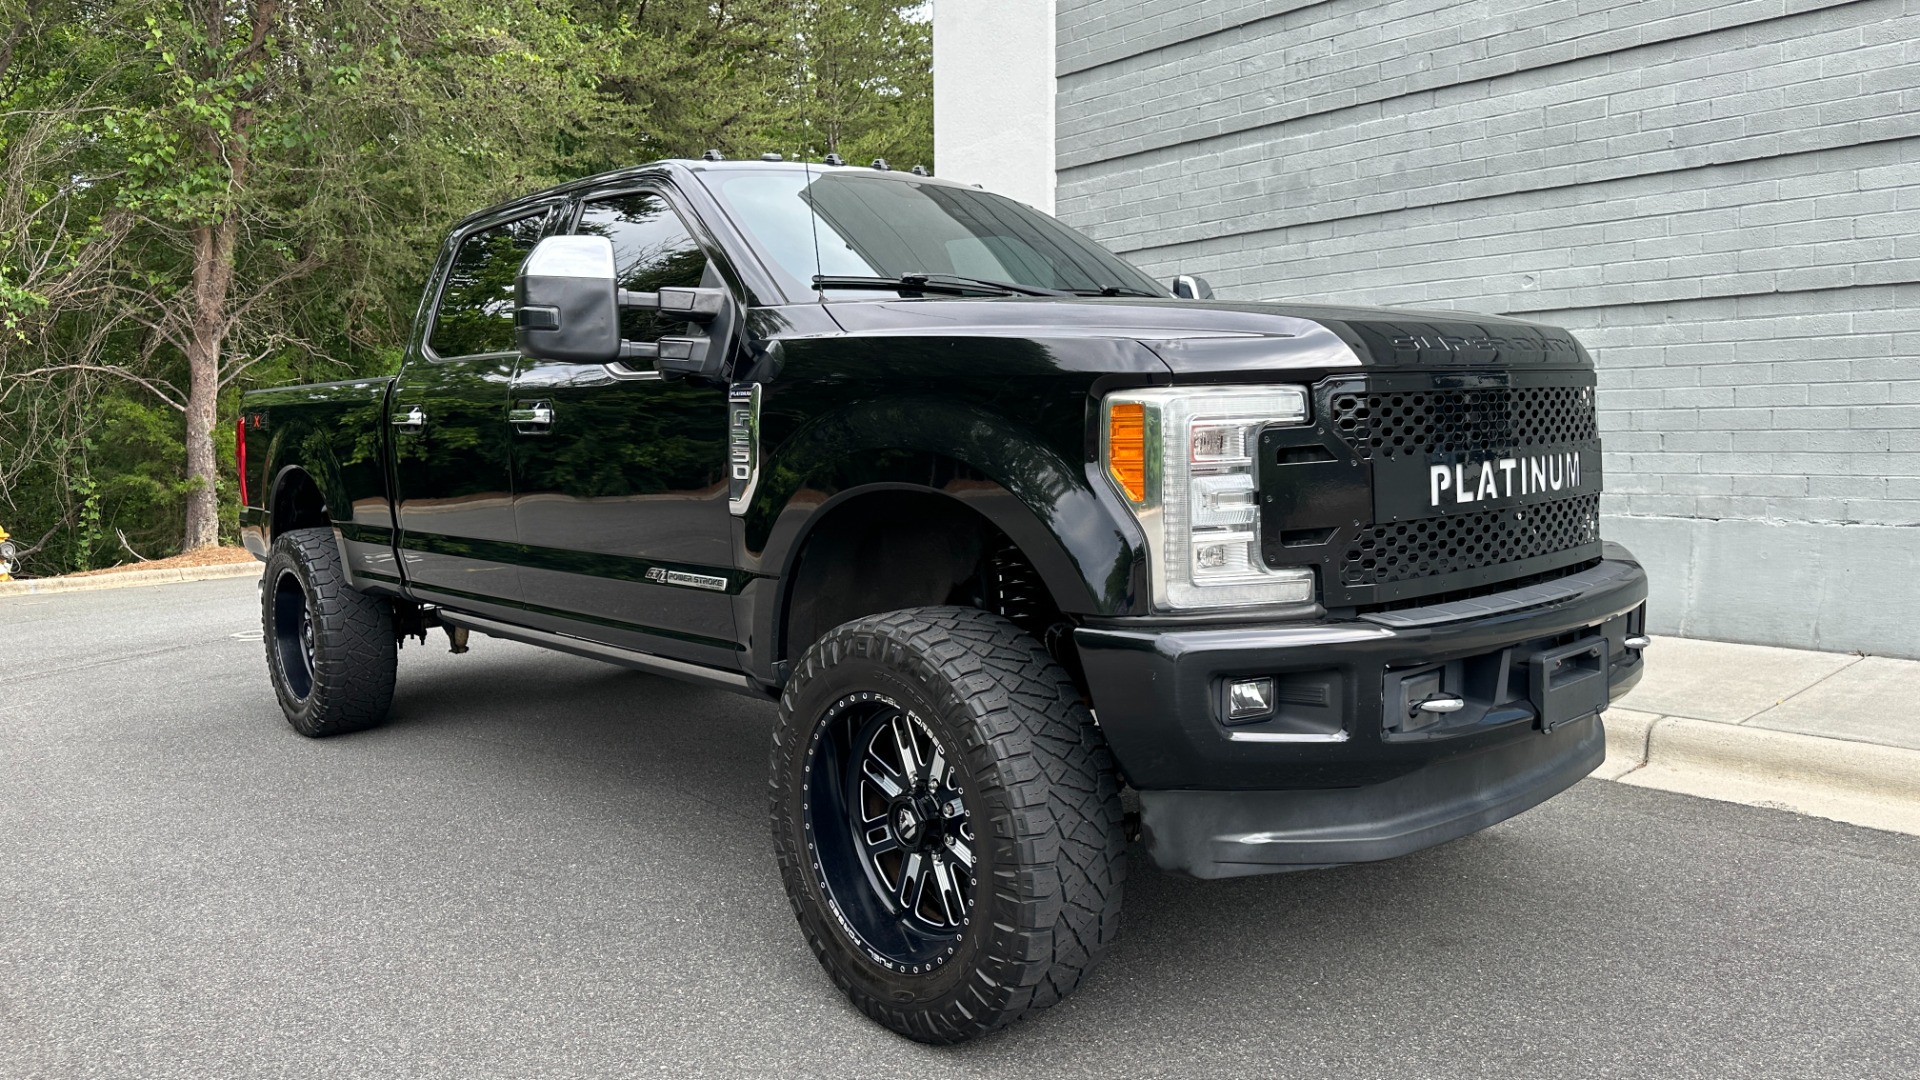 Used 2017 Ford Super Duty F-250 SRW PLATINUM / FABTECH LIFT / FUEL WHEELS / PANORAMIC ROOF / ROCK LIGHTS for sale $62,995 at Formula Imports in Charlotte NC 28227 4